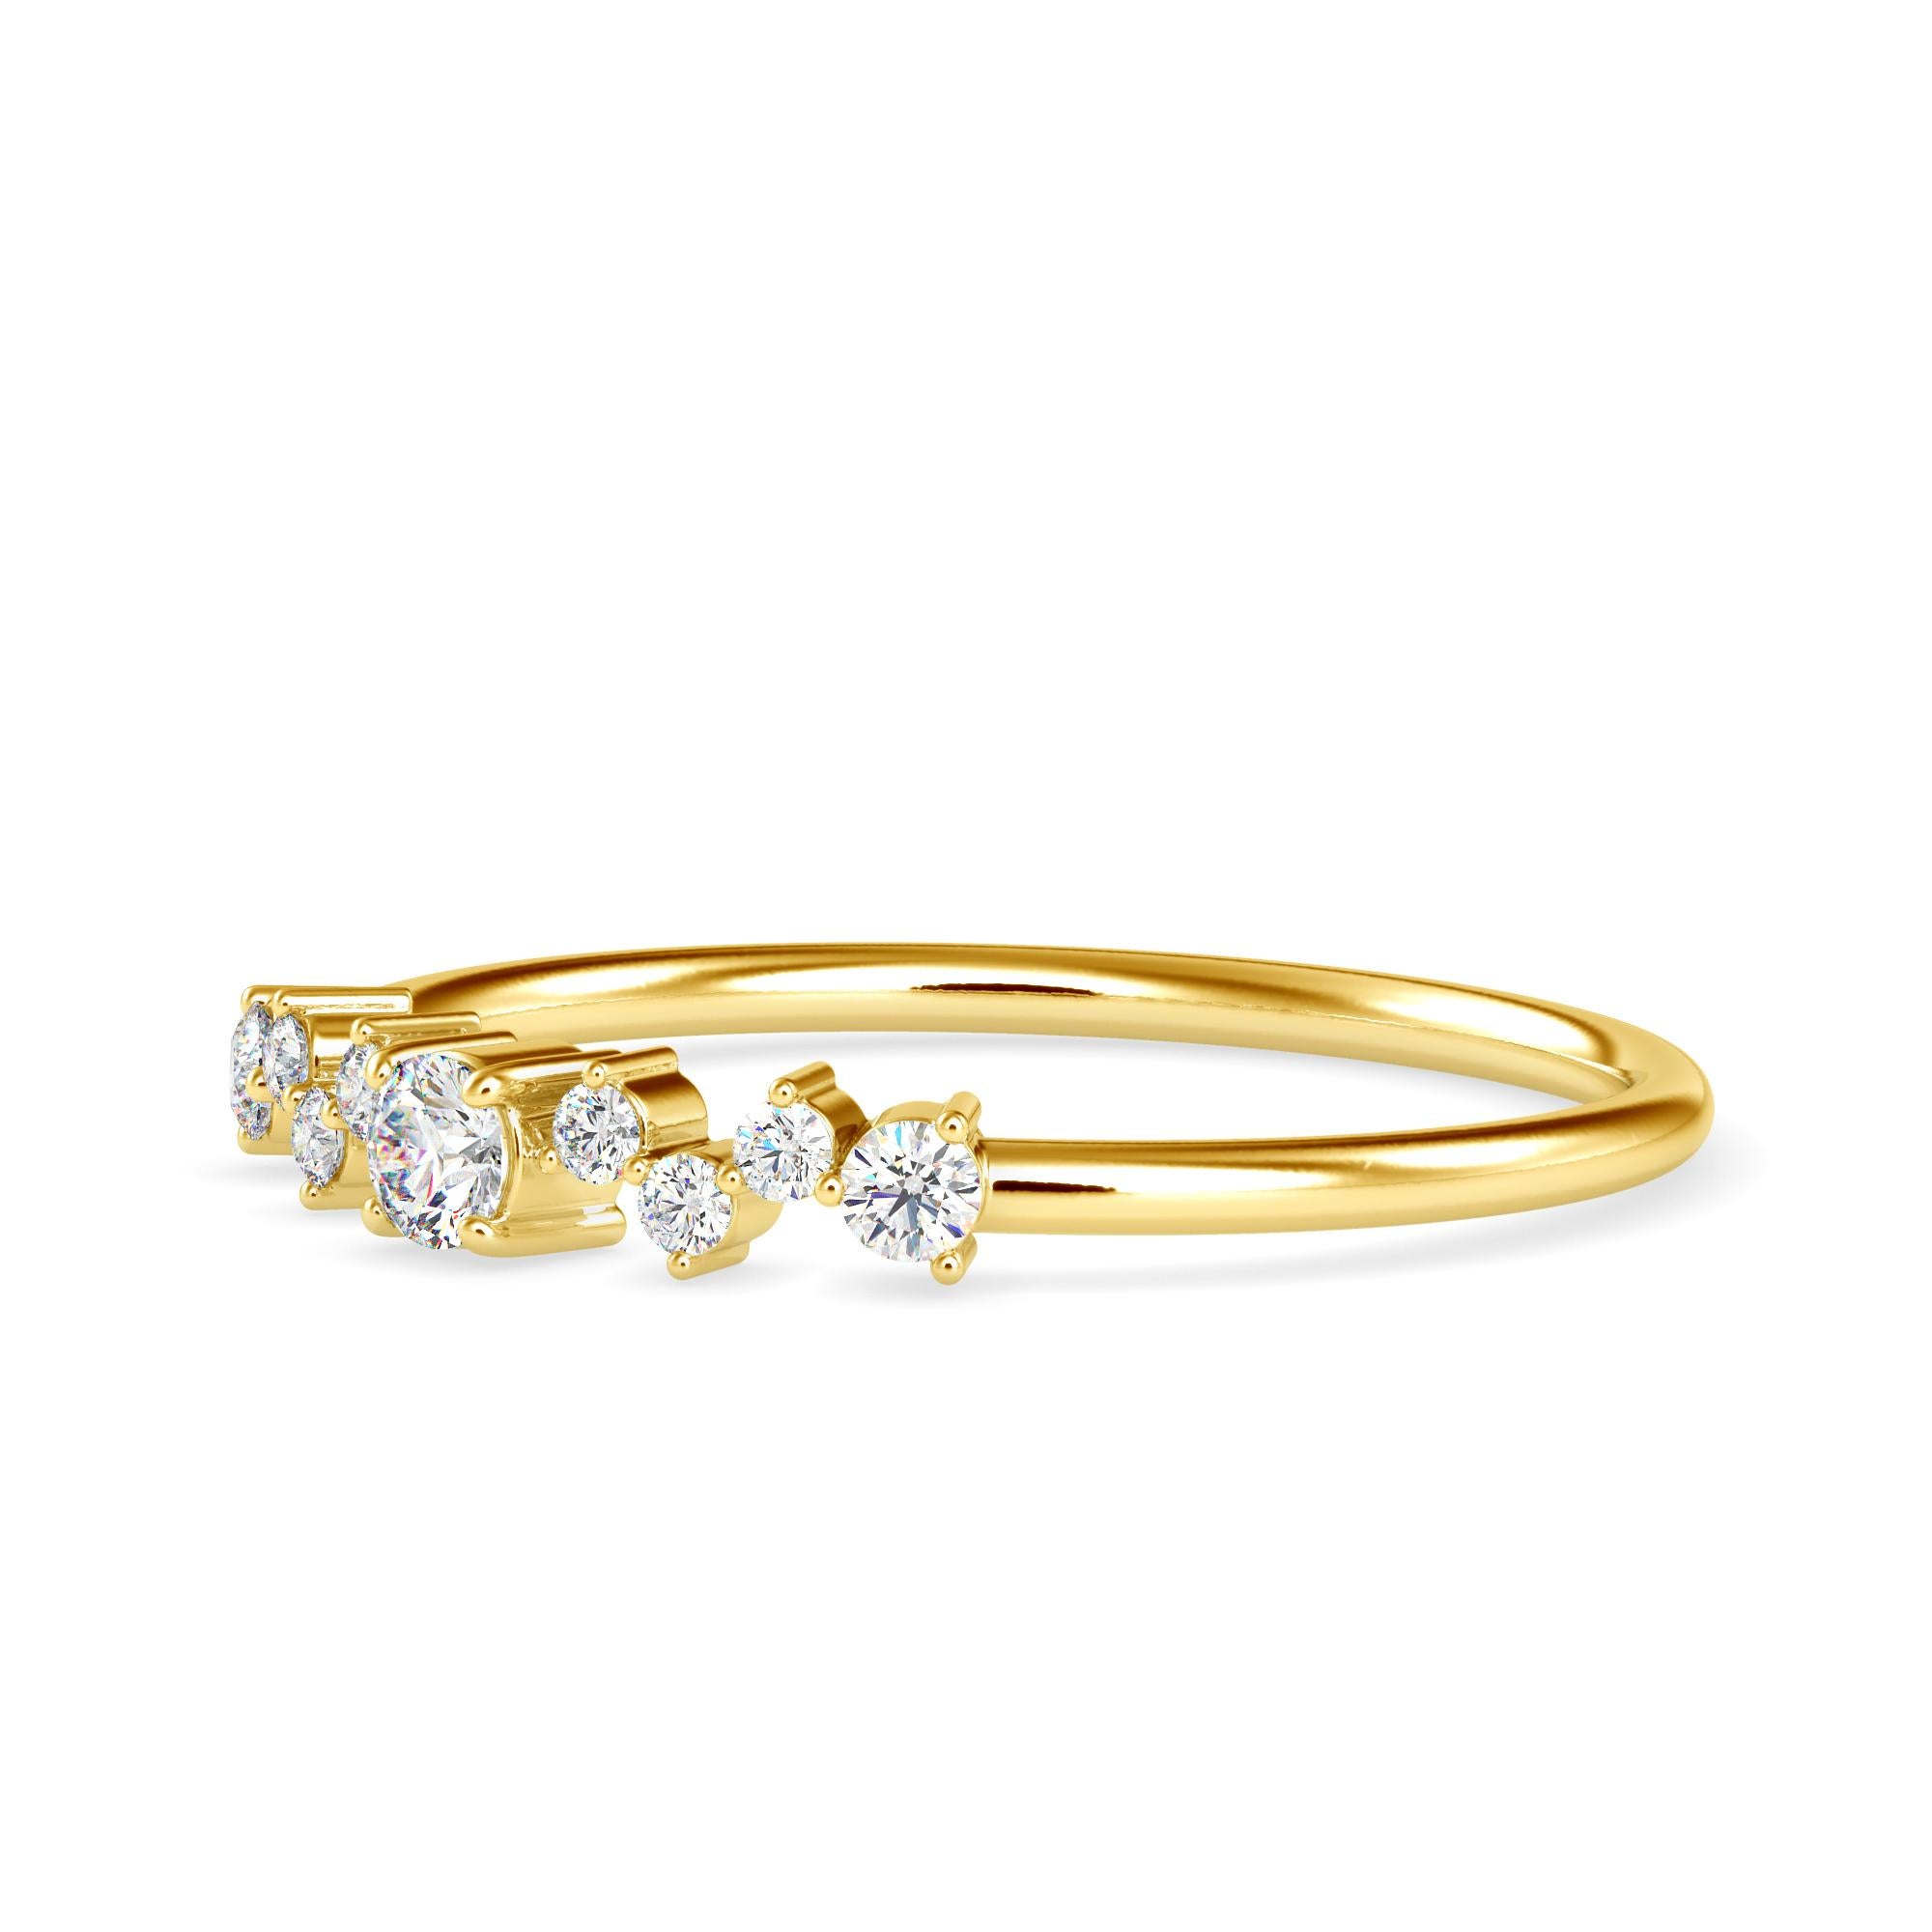 0.11 Carat Diamond 14K Yellow Gold Ring
Stamped: 14K
Total Ring Weight: 1.2 Grams
Center Diamond Weight: 0.06 Carat (F-G Color, VS2-SI1 Clarity) 2.5 Millimeters 
Side Diamonds Weight: 0.049 Carat (F-G Color, VS2-SI1 Clarity), 1.3 Millimeters 
Side